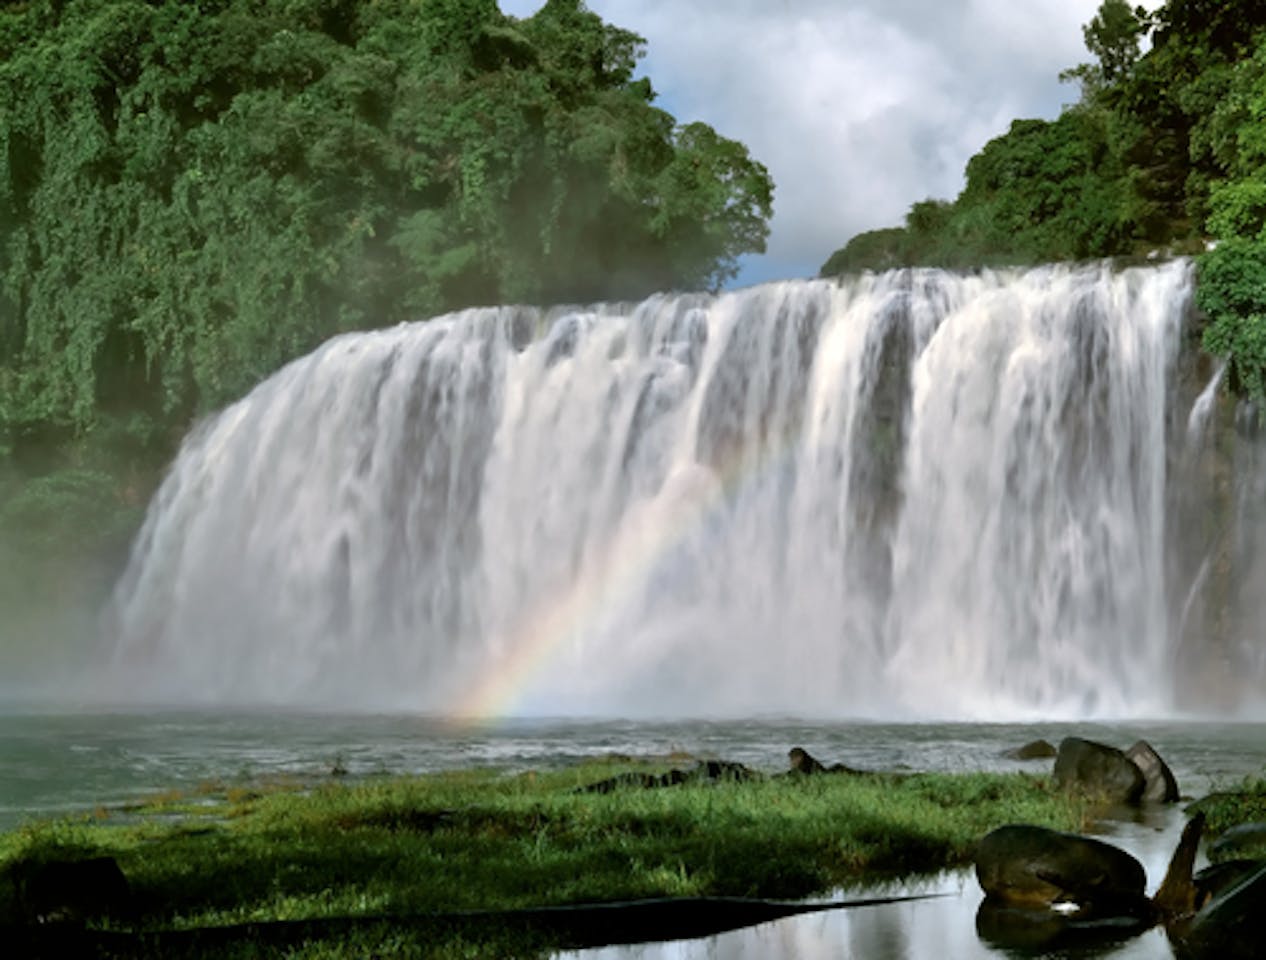 11 Mindanao rivers and waterfalls as potential hydropower sources | News Eco-Business | Asia Pacific